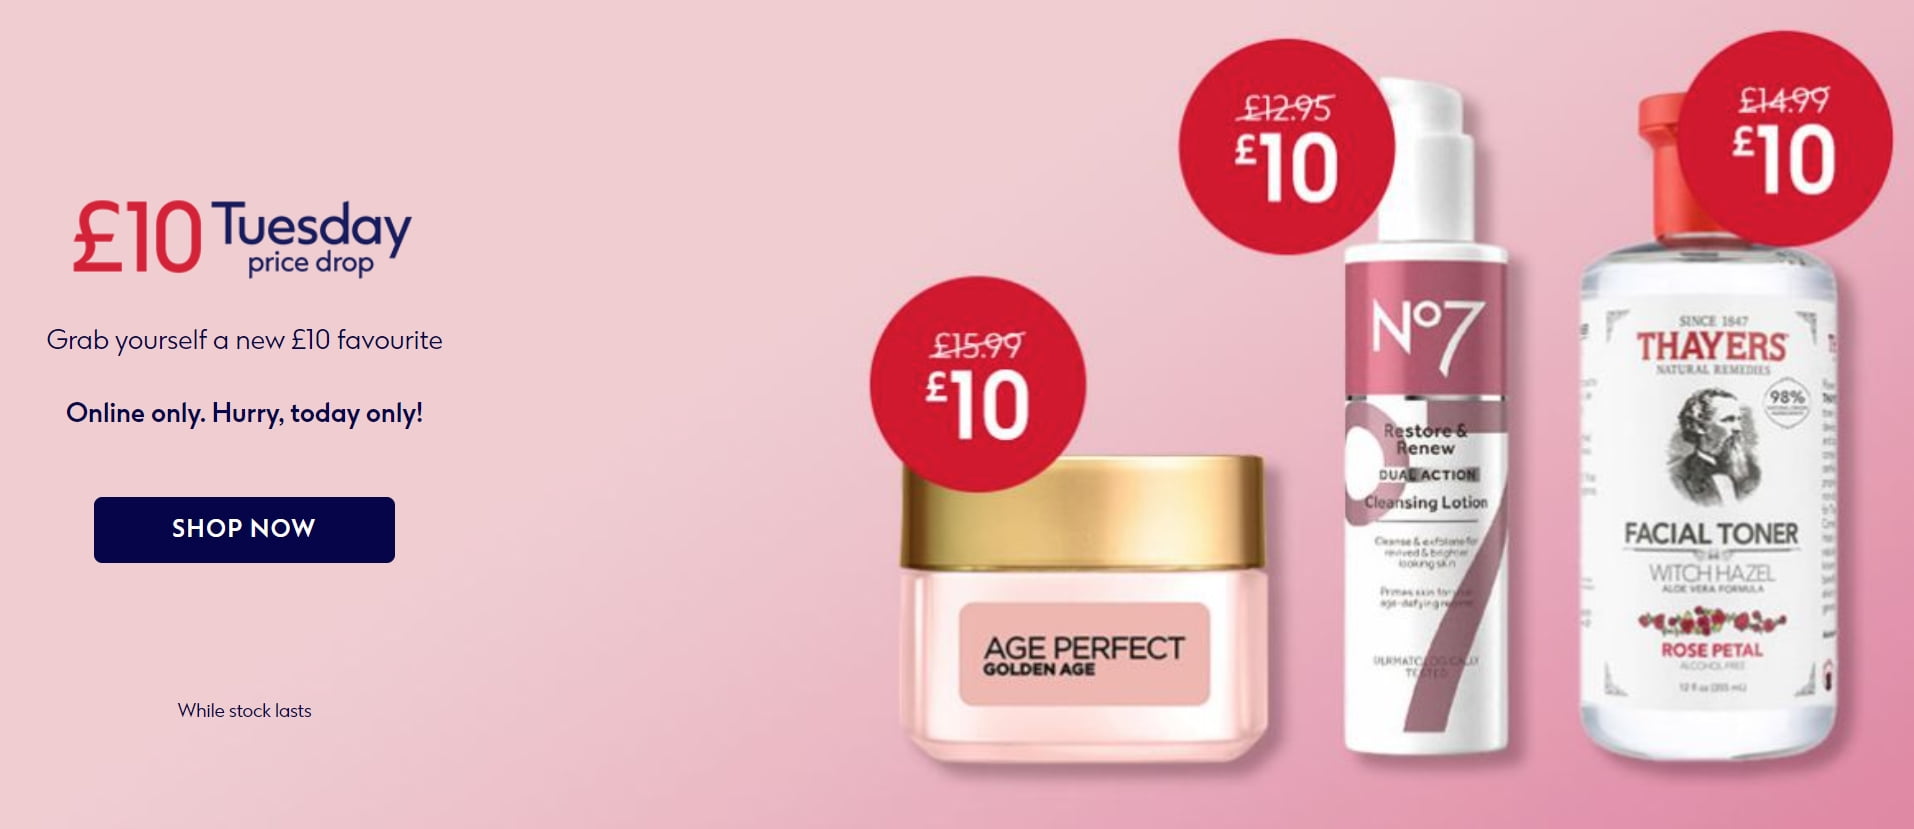 £10 Tuesday at Boots